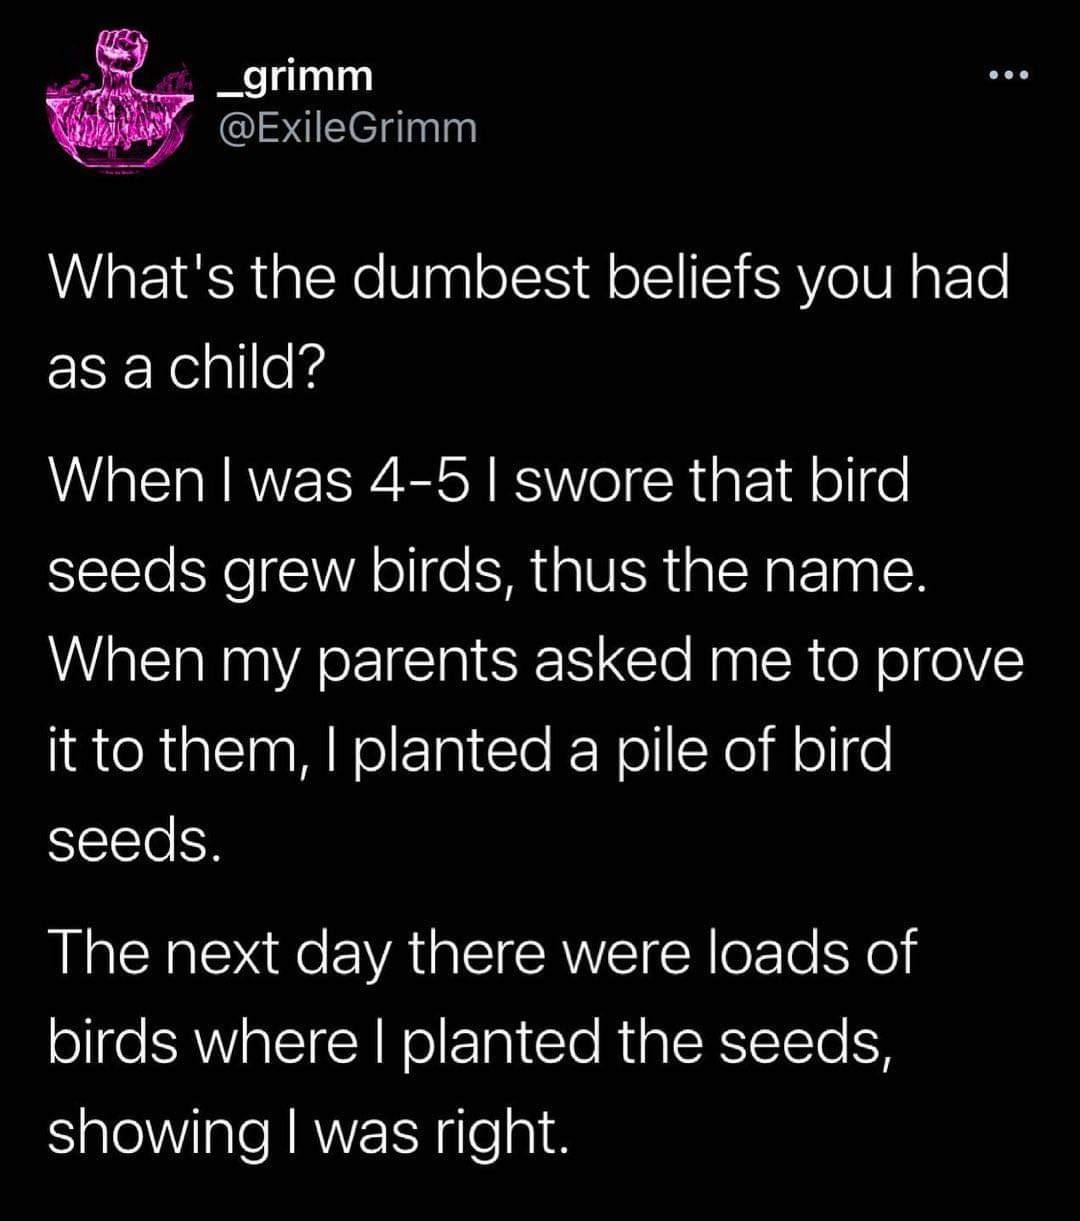 Out of the ground they rose. What was your dumbest belief?